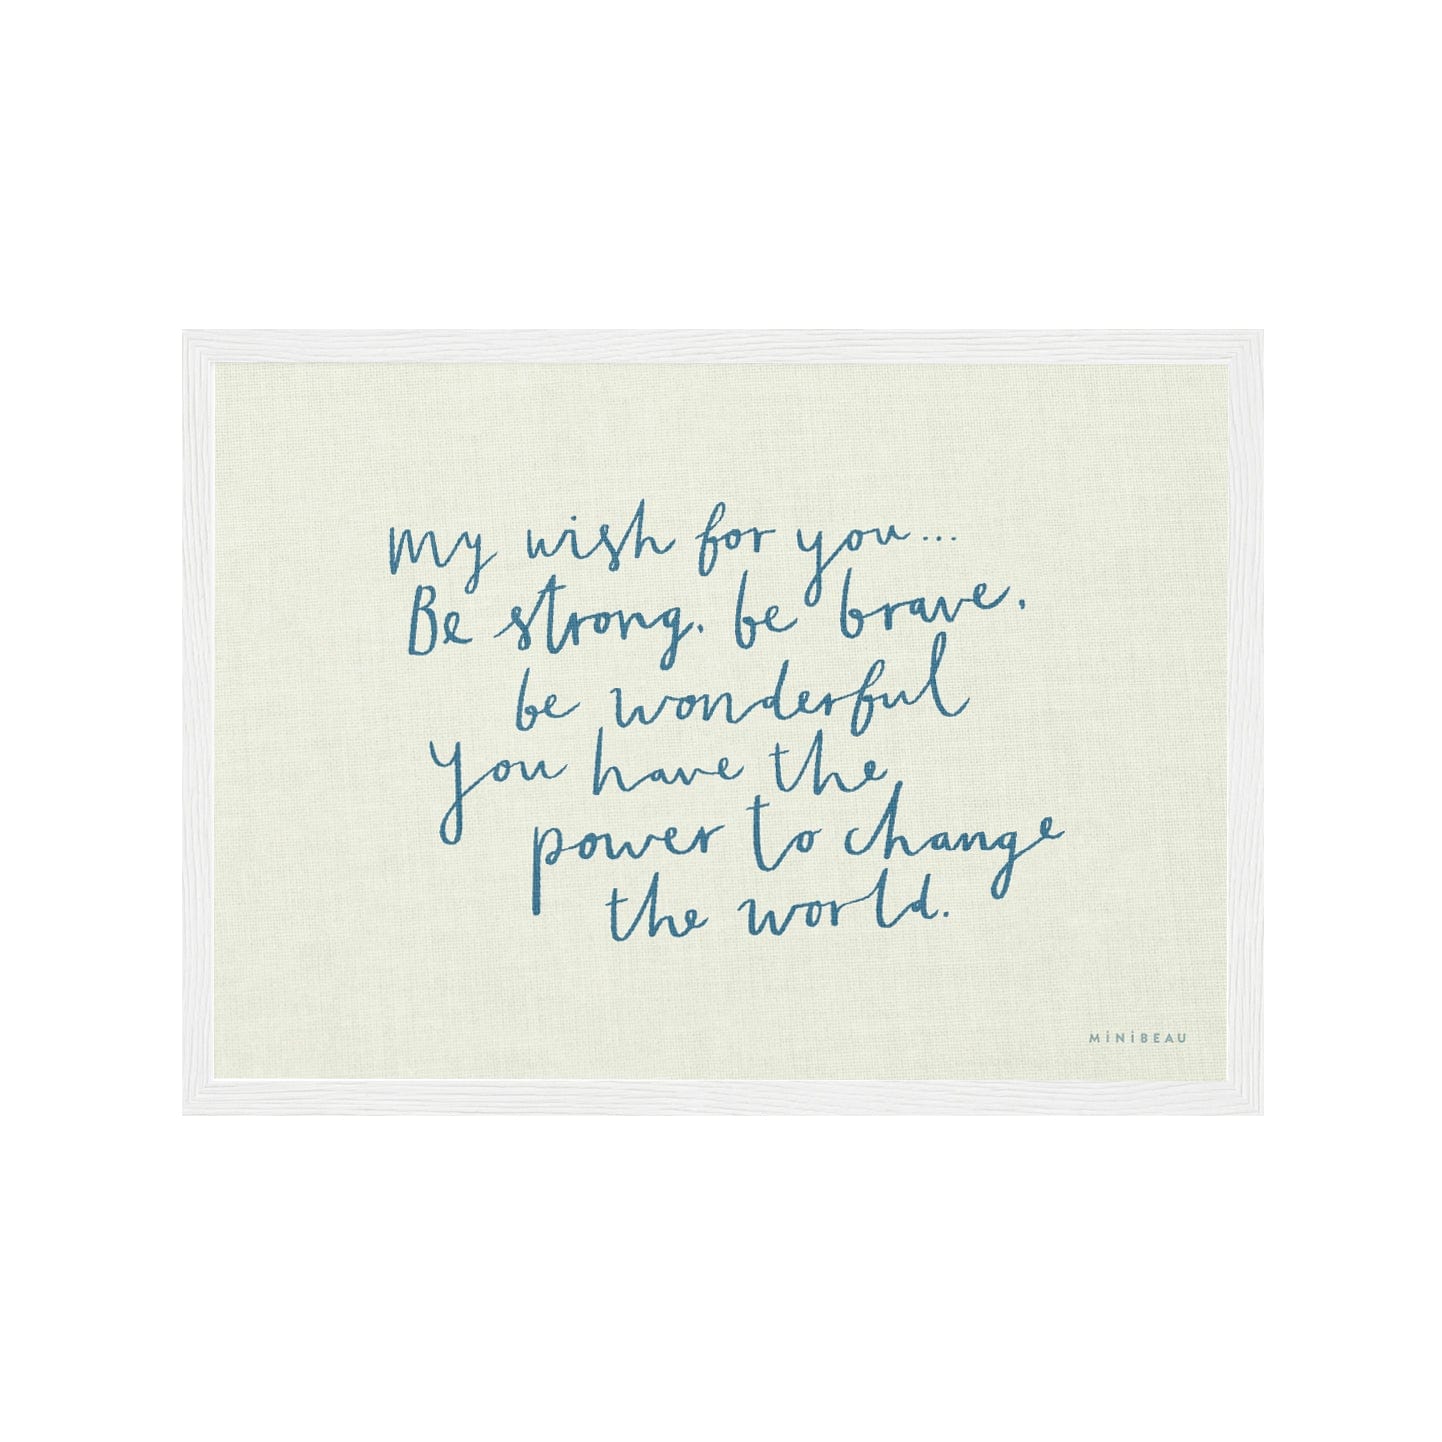 Art print in a white frame, Our My Wish for you art print in hand-written typography in blue says MY WISH FOR YOU BE STRONG, BE BRAVE, BE WONDERFUL. YOU HAVE THE POWER TO CHANGE THE WORLD, on a cream background.